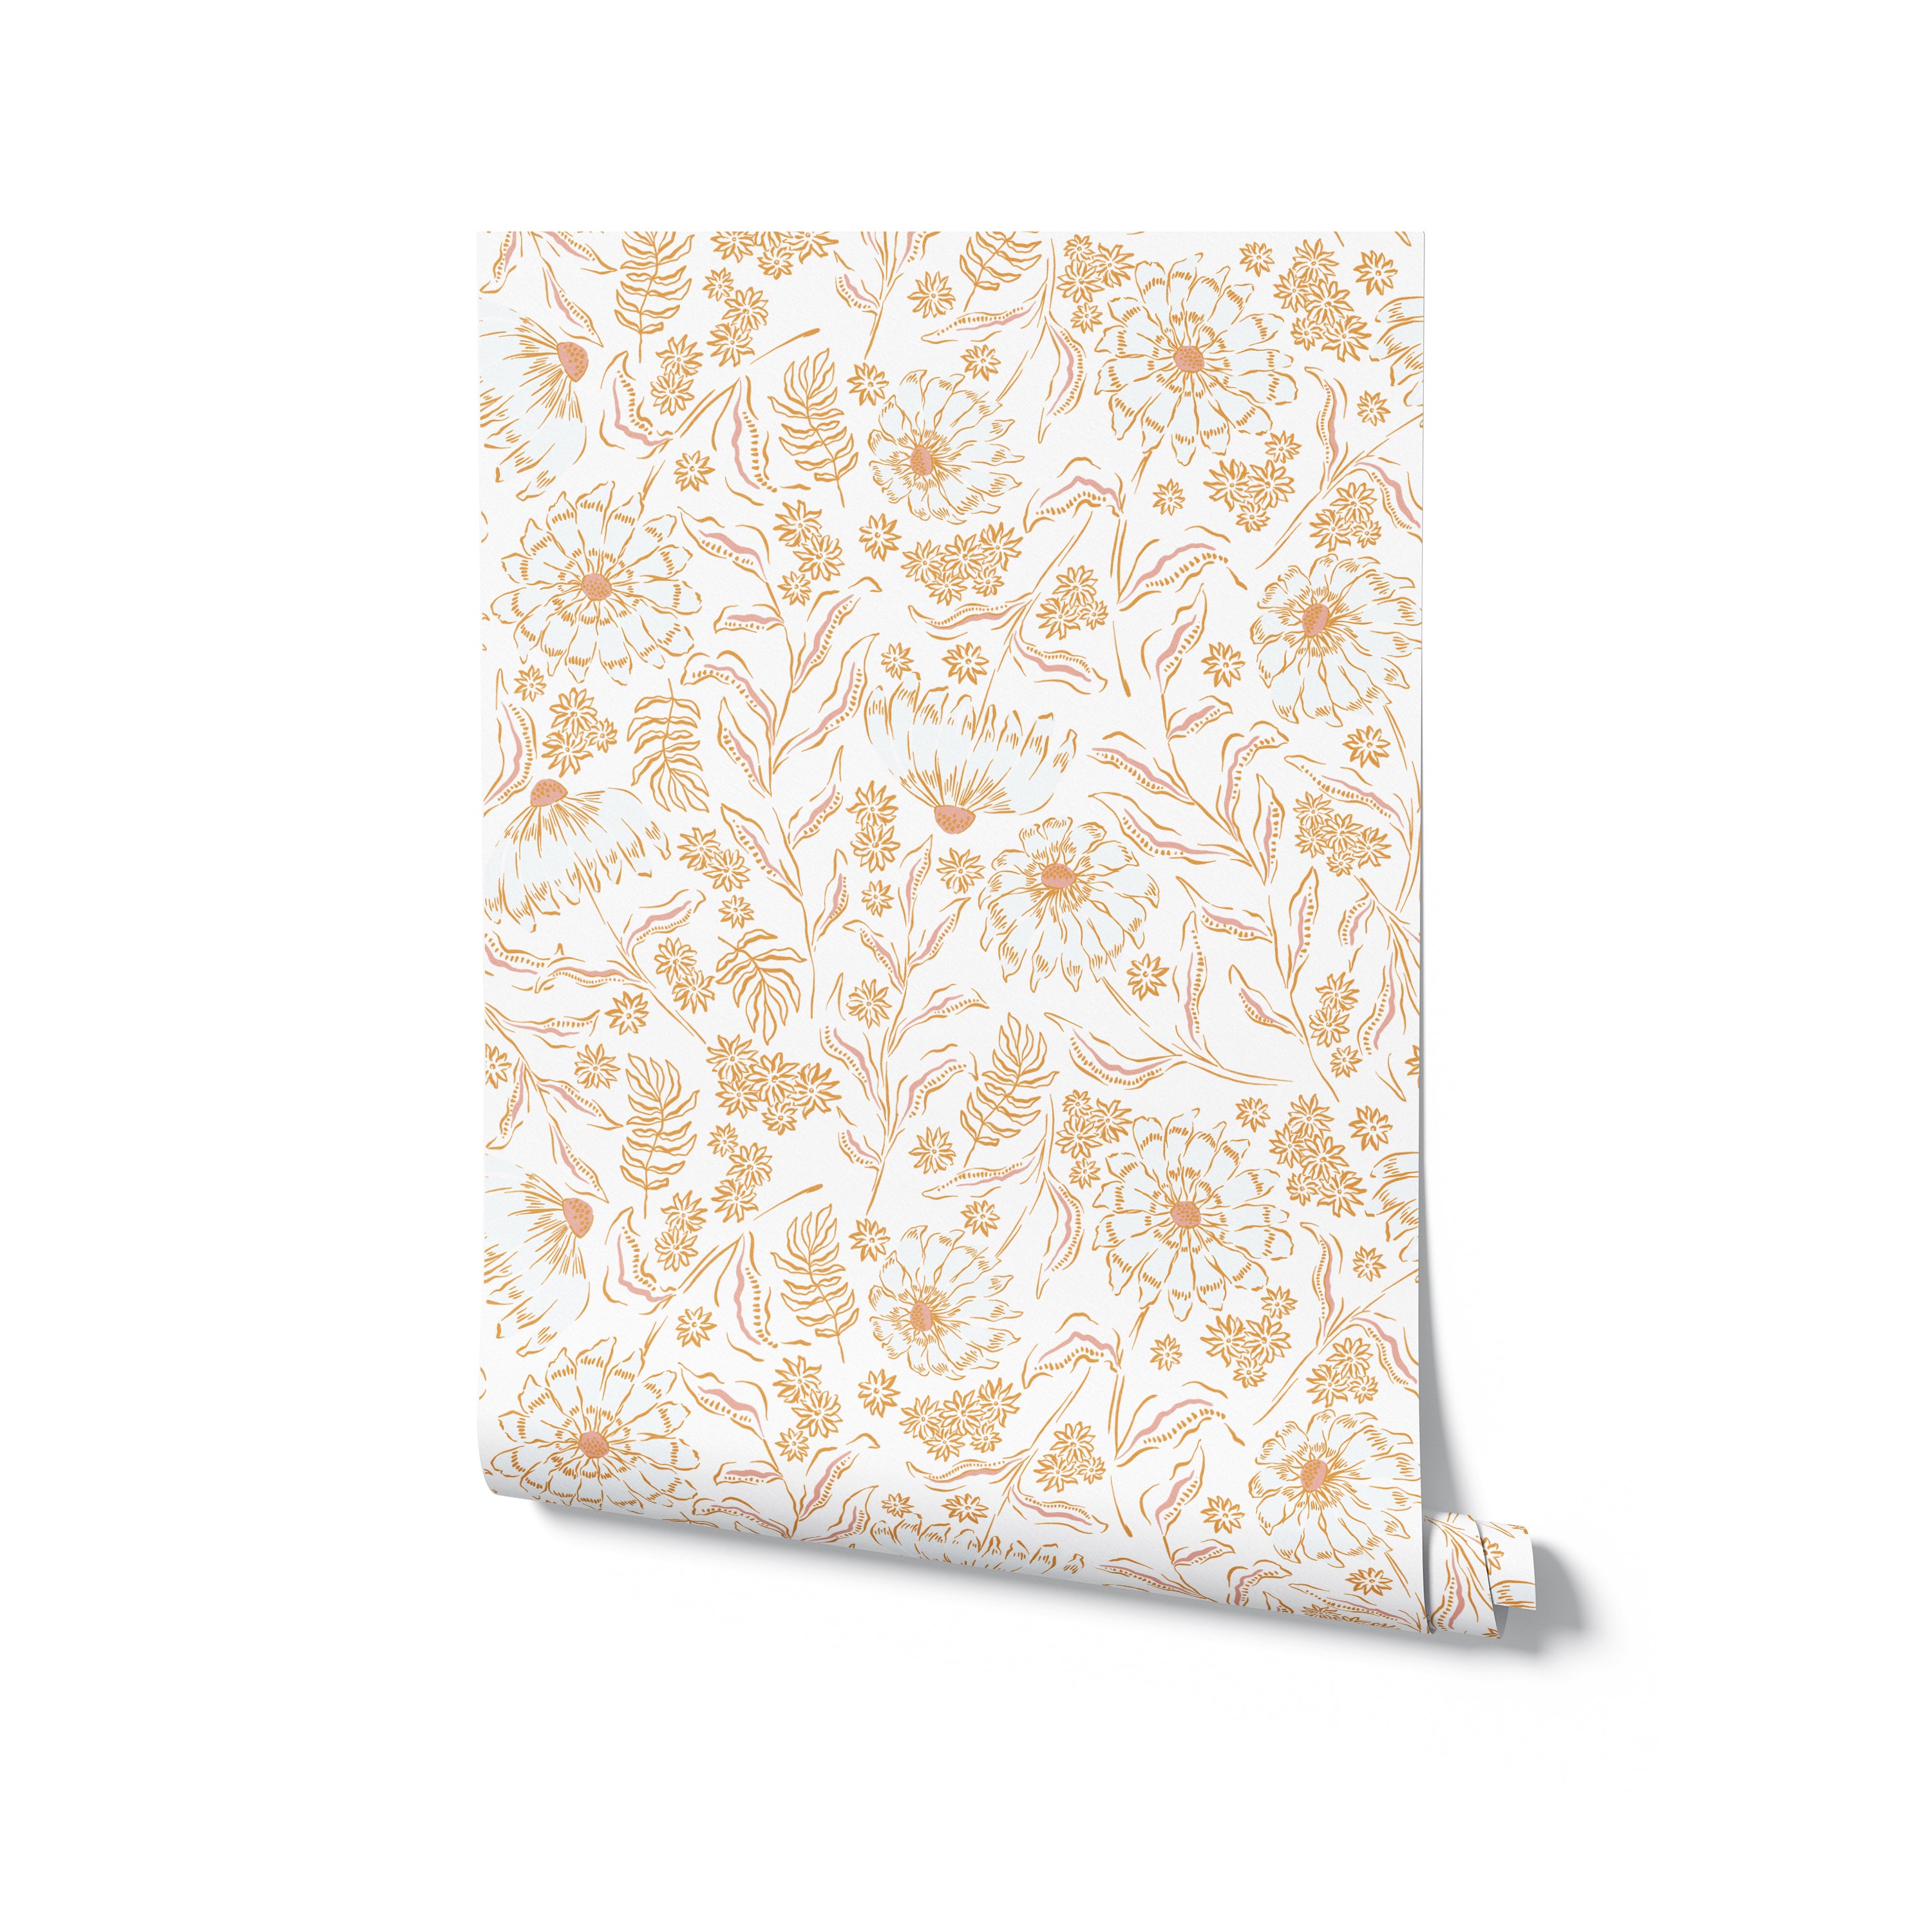 A close-up image of a rolled De Pijp Floral Wallpaper. The wallpaper features intricate golden flowers and botanical designs on a creamy white background, ready to enhance any room with its elegant and timeless floral pattern.